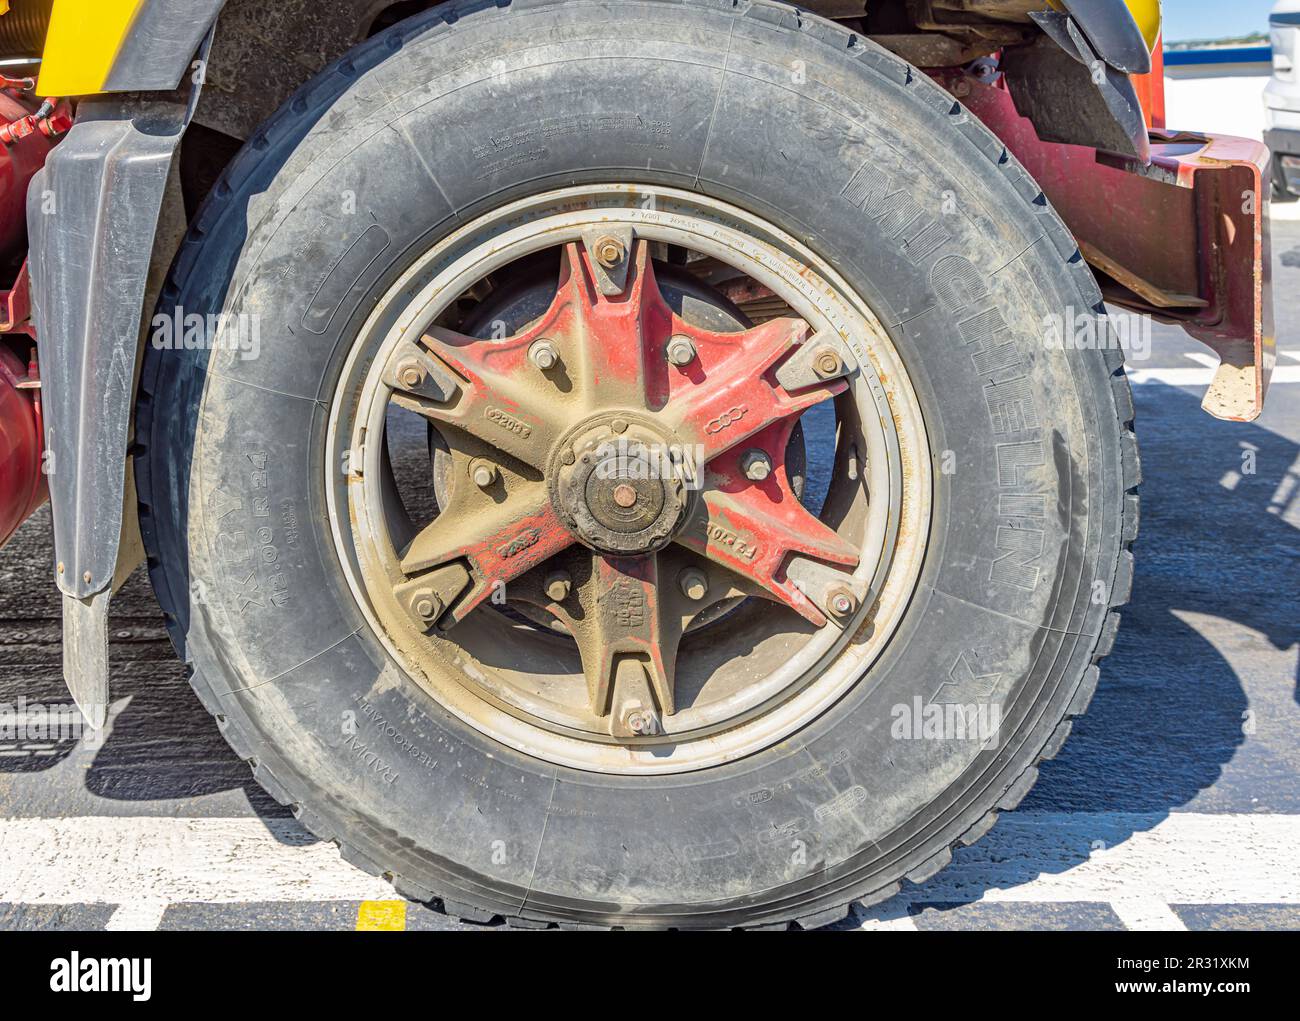 Detail image of a large dirty truck tire Stock Photo